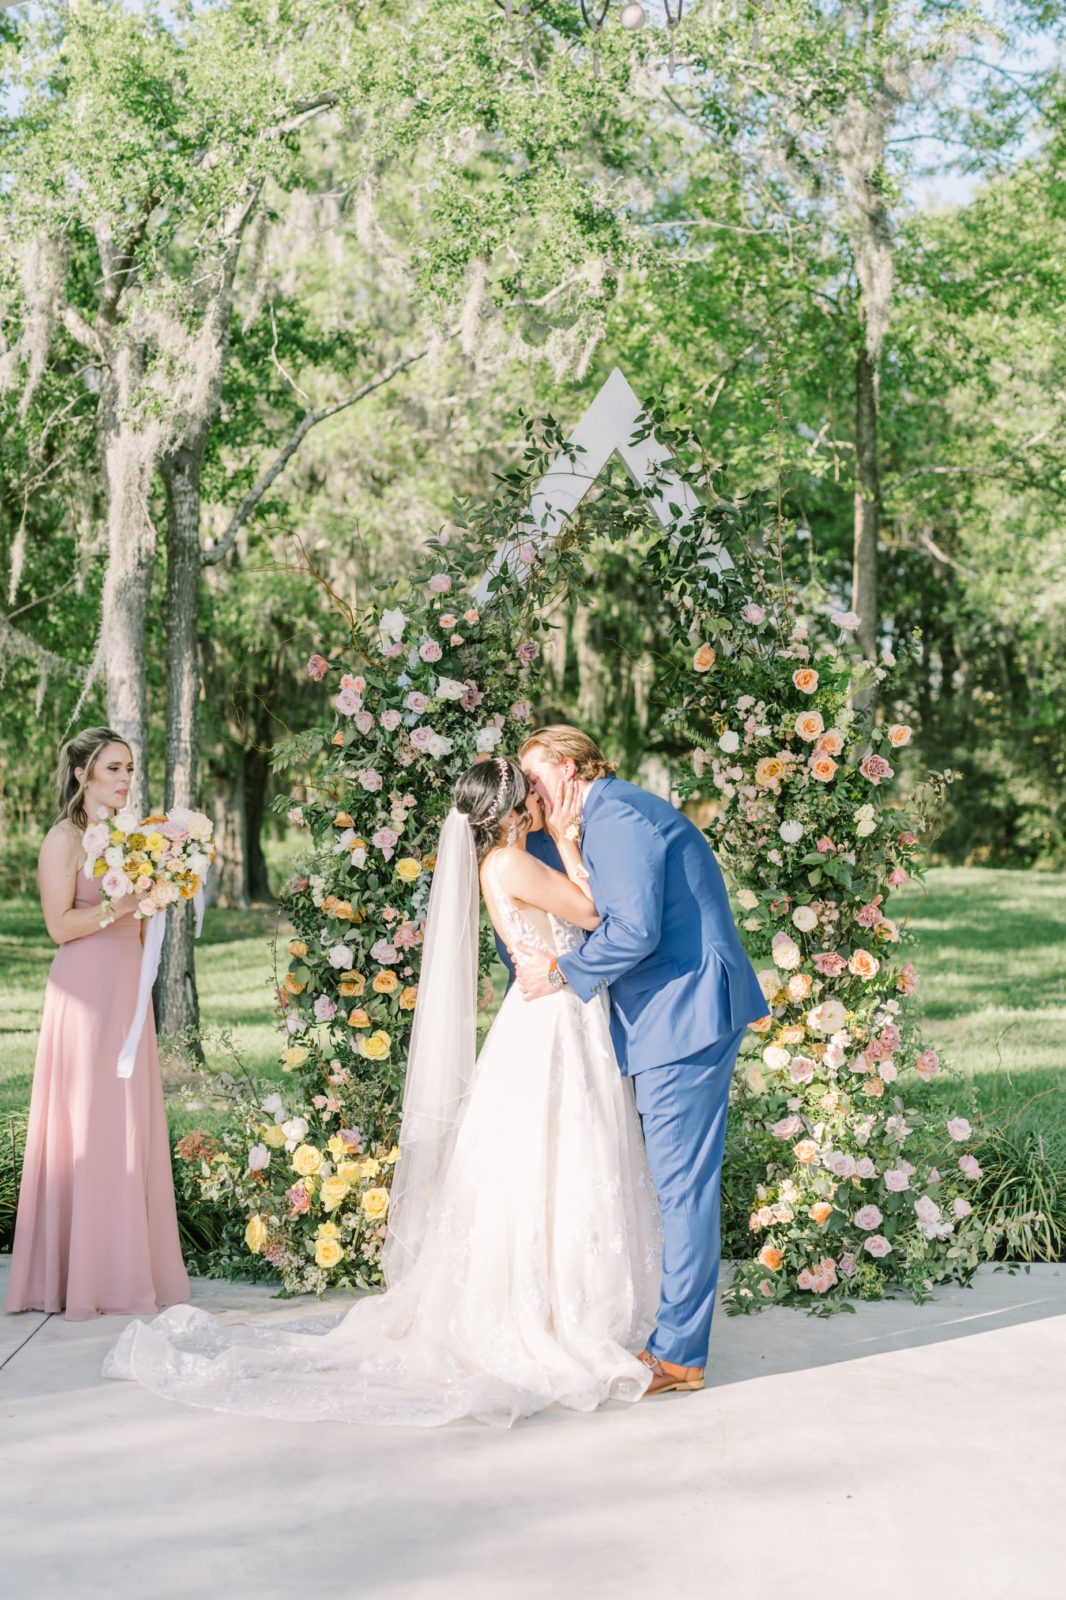 Groom and bride kiss at the altar the first kiss as newlyweds by Christina Elliott Photography. wedding photographer East Houston #ChristinaElliottPhotography #ChristinaElliottWeddings #Houstonwedding #TheSpringsVenue #EastHoustonweddings #sayIdo